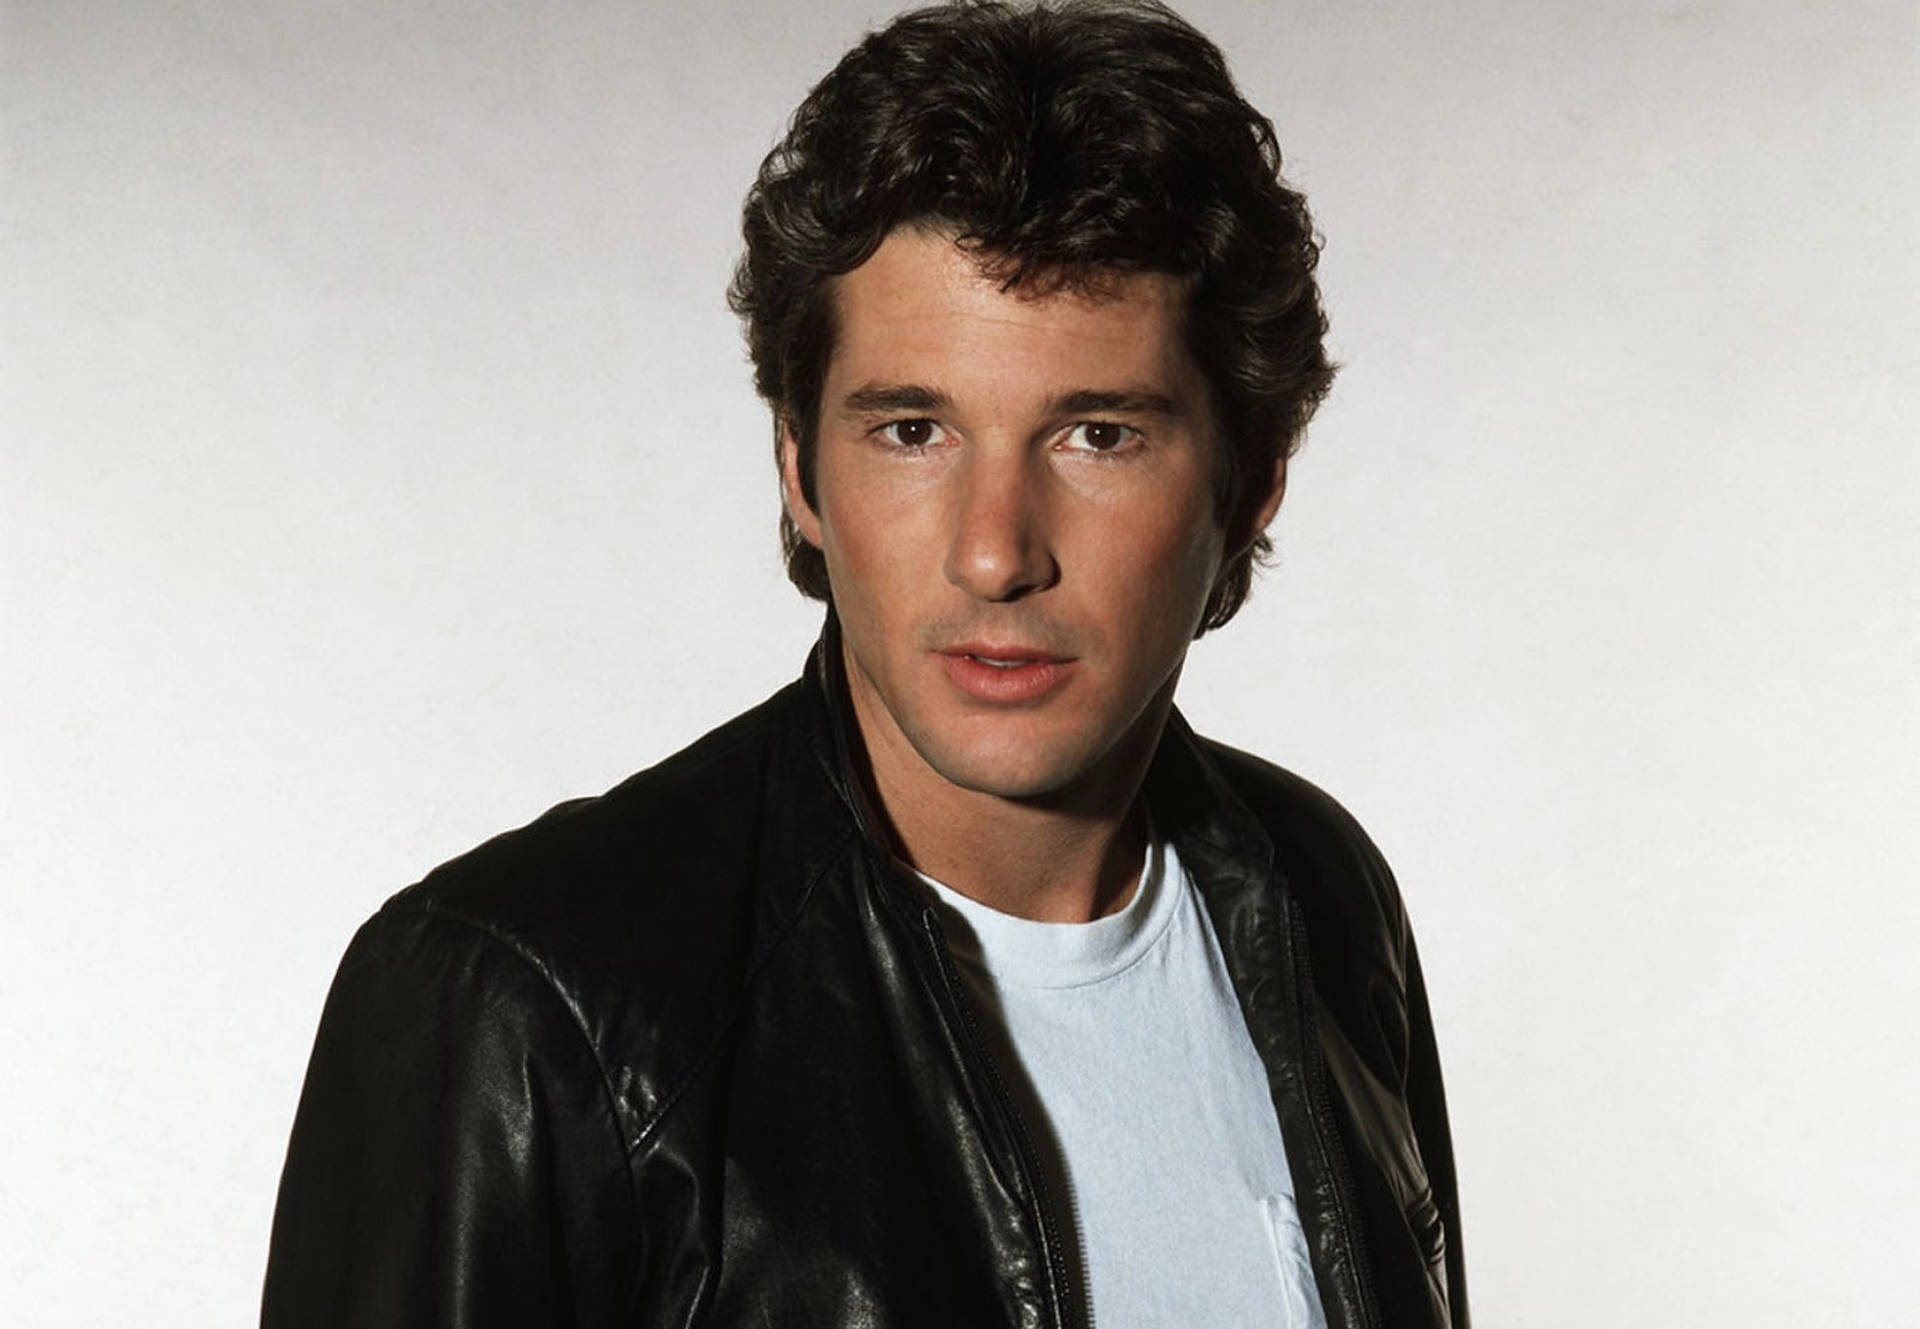 Captivating Portrait Of A Young Richard Gere